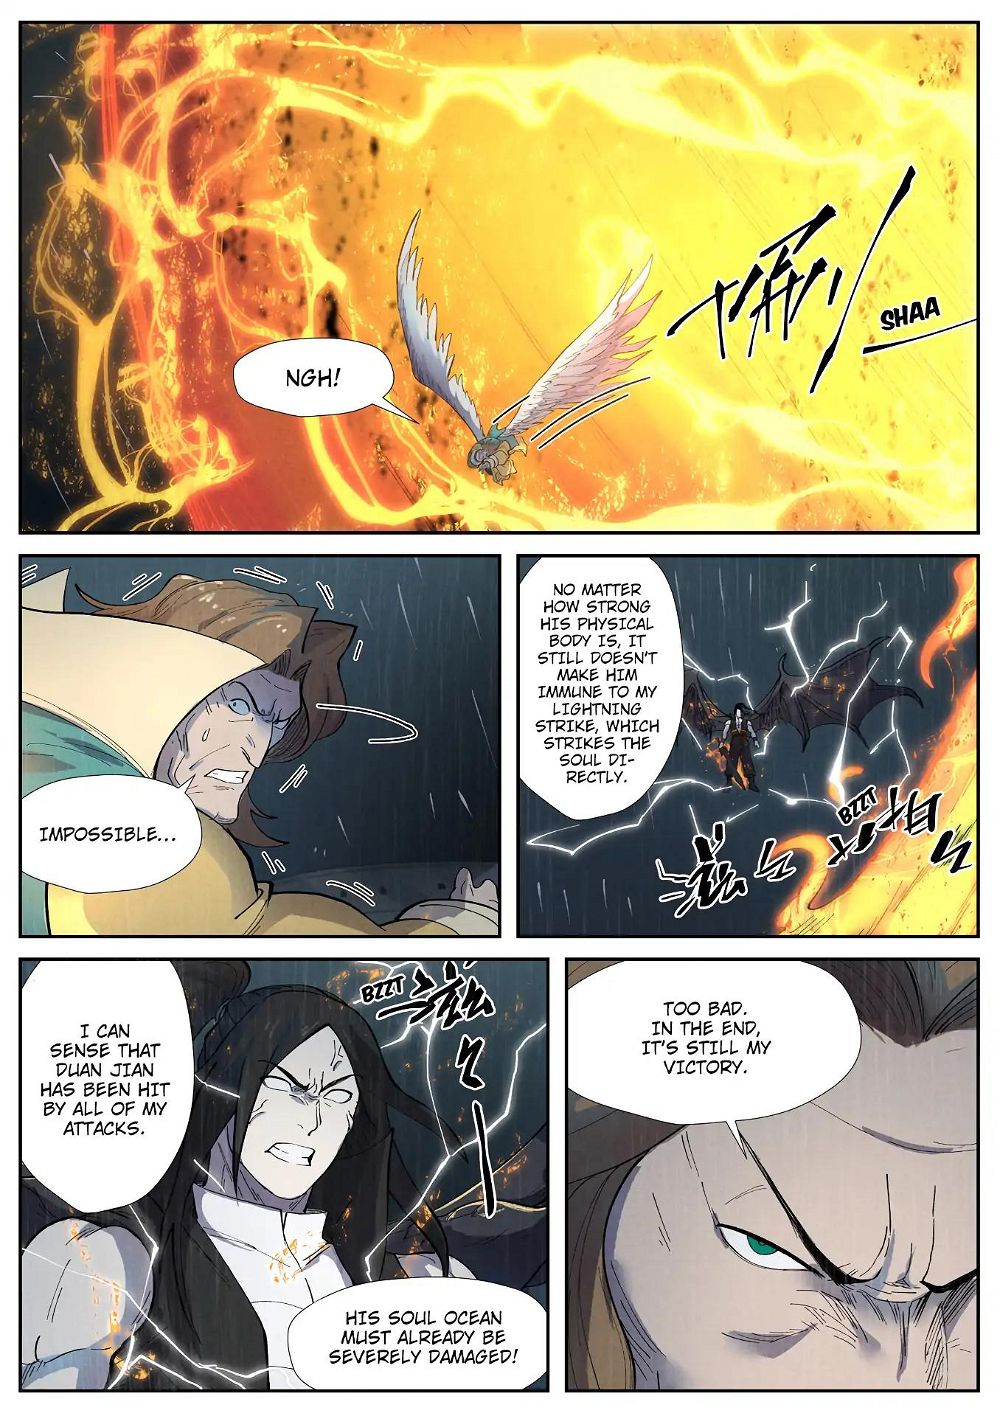 Tales of Demons and Gods Chapter 247.5 - Page 6